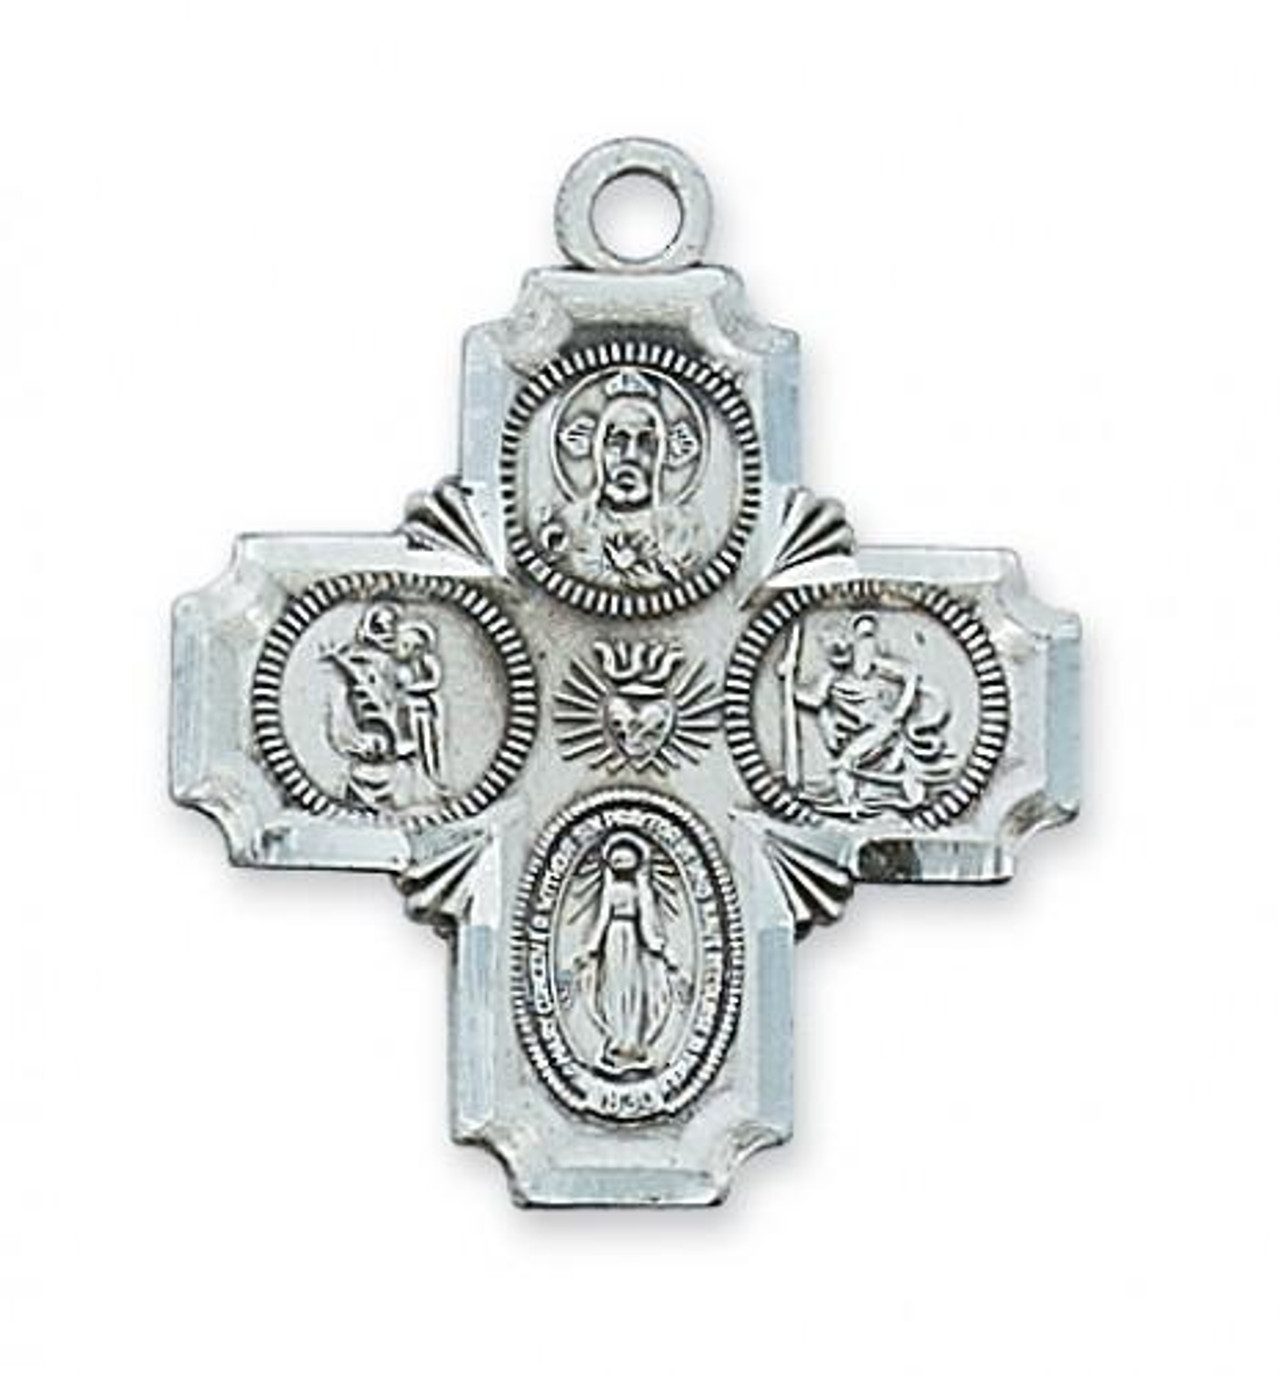 Four Way Catholic Saint Medal Sterling Silver